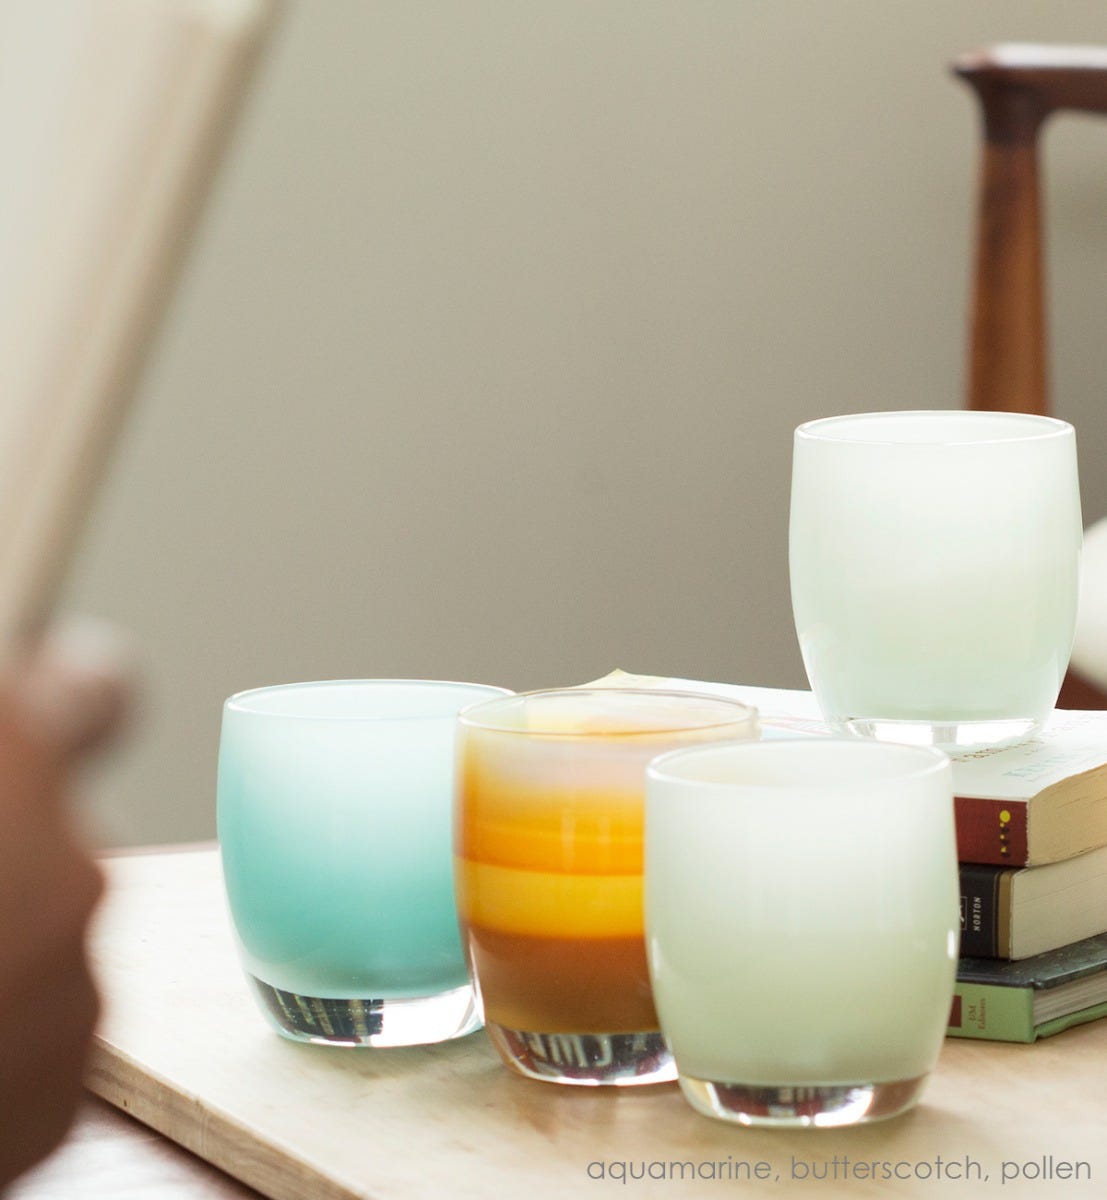 aquamarine hand-blown glass votive candle holder. Paired with butterscotch and pollen.